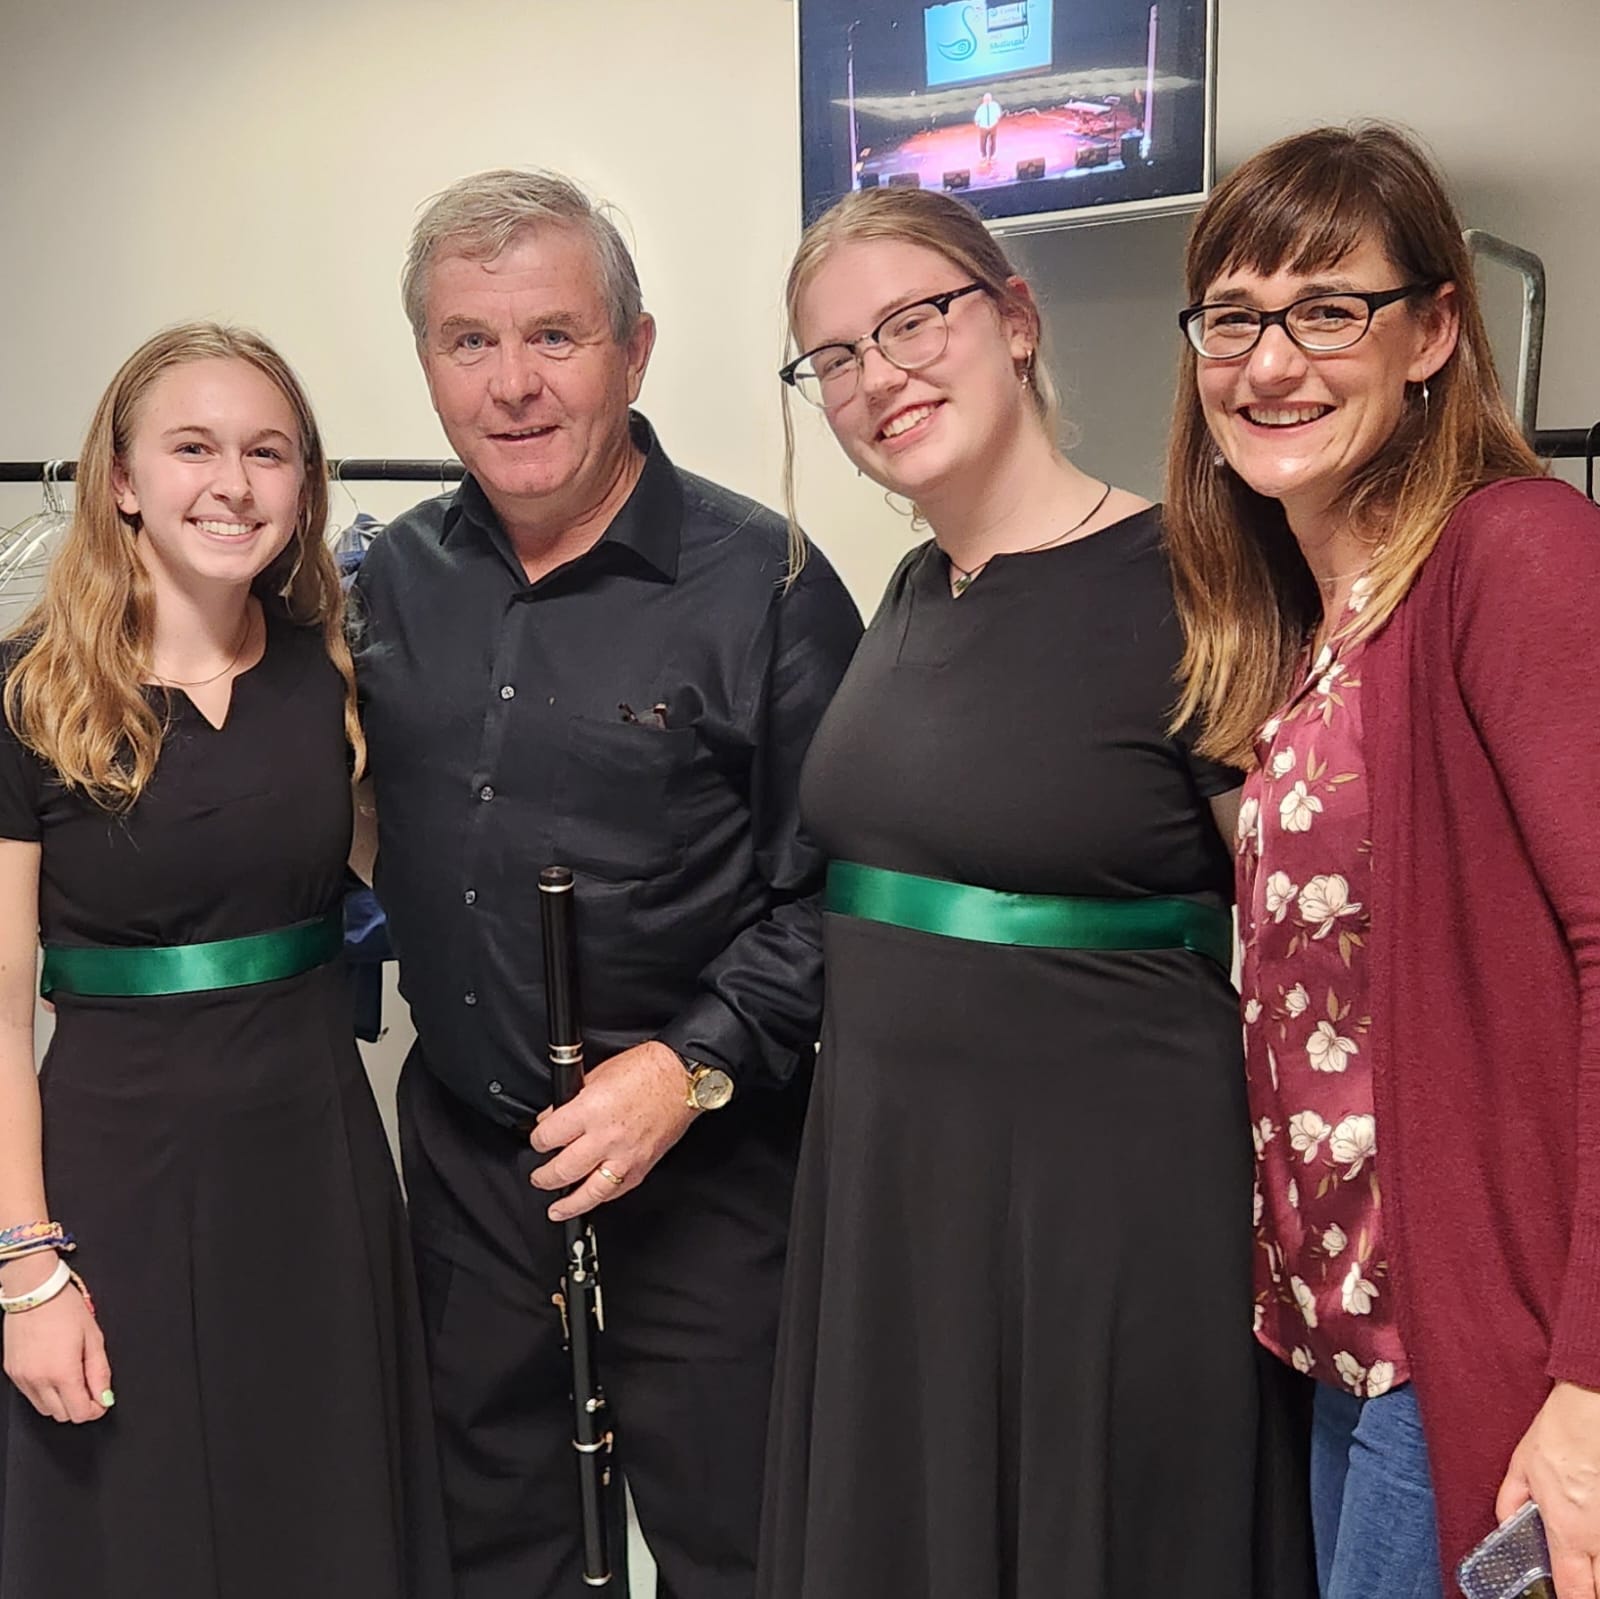 Ginger and Nevellie posing with flute maker Eamonn Cotter (2013 MIM artist), and their flute instructor Norah Rendell, also CIM's Executive Artistic Director.